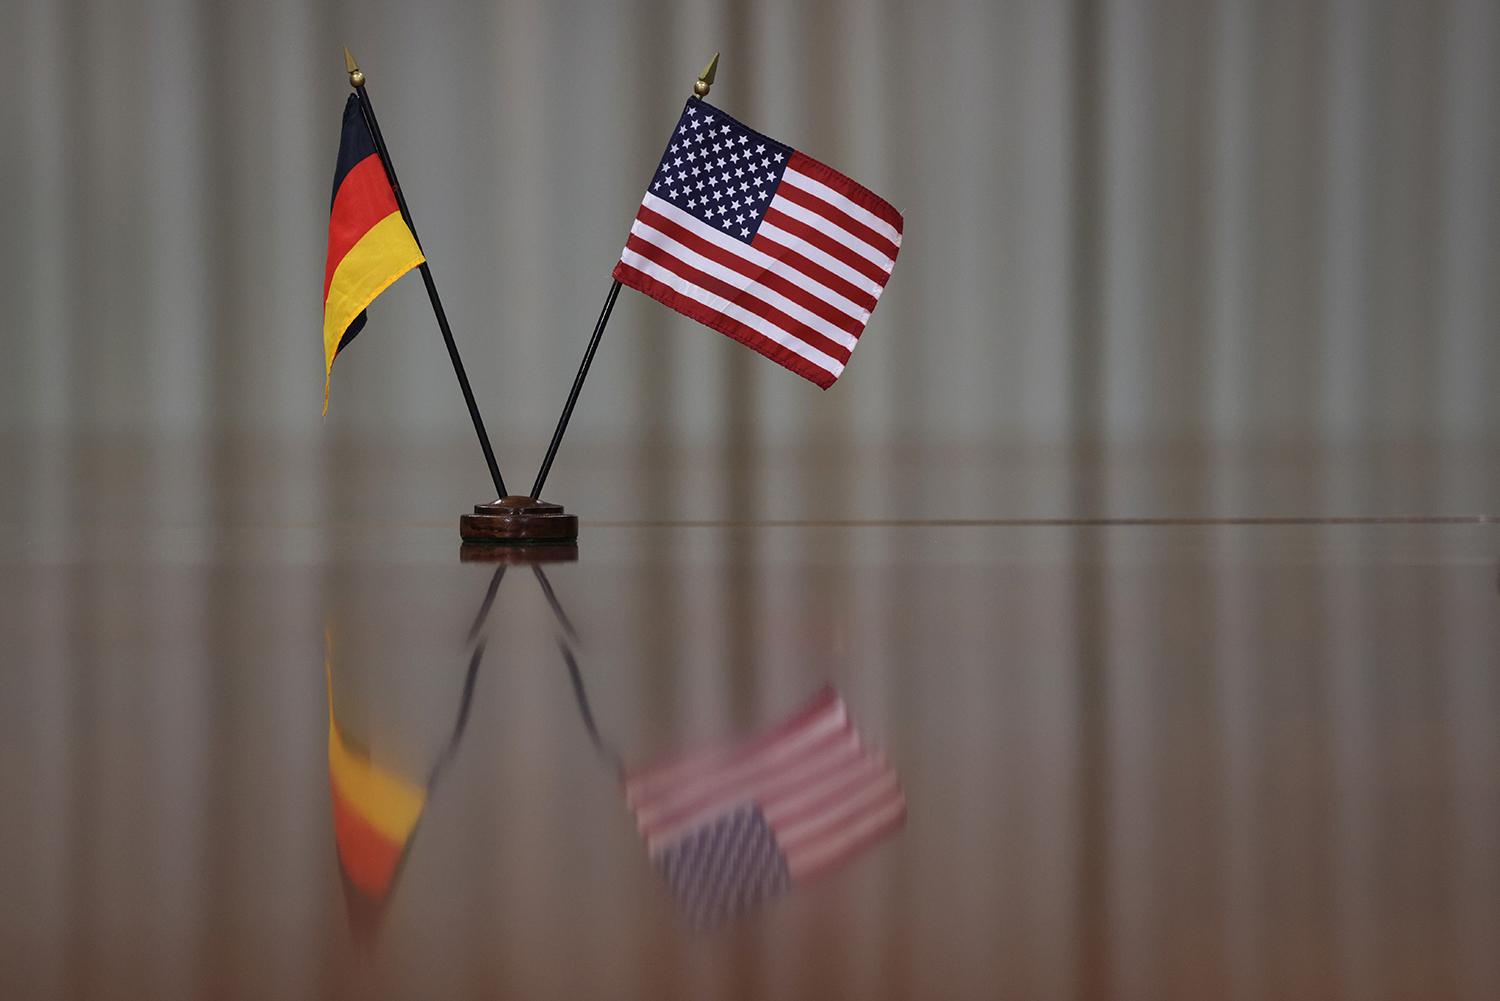 Germany and the United States are the two two countries of origins for attacks exploiting the Log4j vulnerability, according to Bitdefender. Pictured: A U.S. flag and a German flag are placed on the conference table during a meeting between U.S. Secretary of Defense Lloyd Austin and German Minister of Defense Annegret Kramp-Karrenbauer at the Penta...